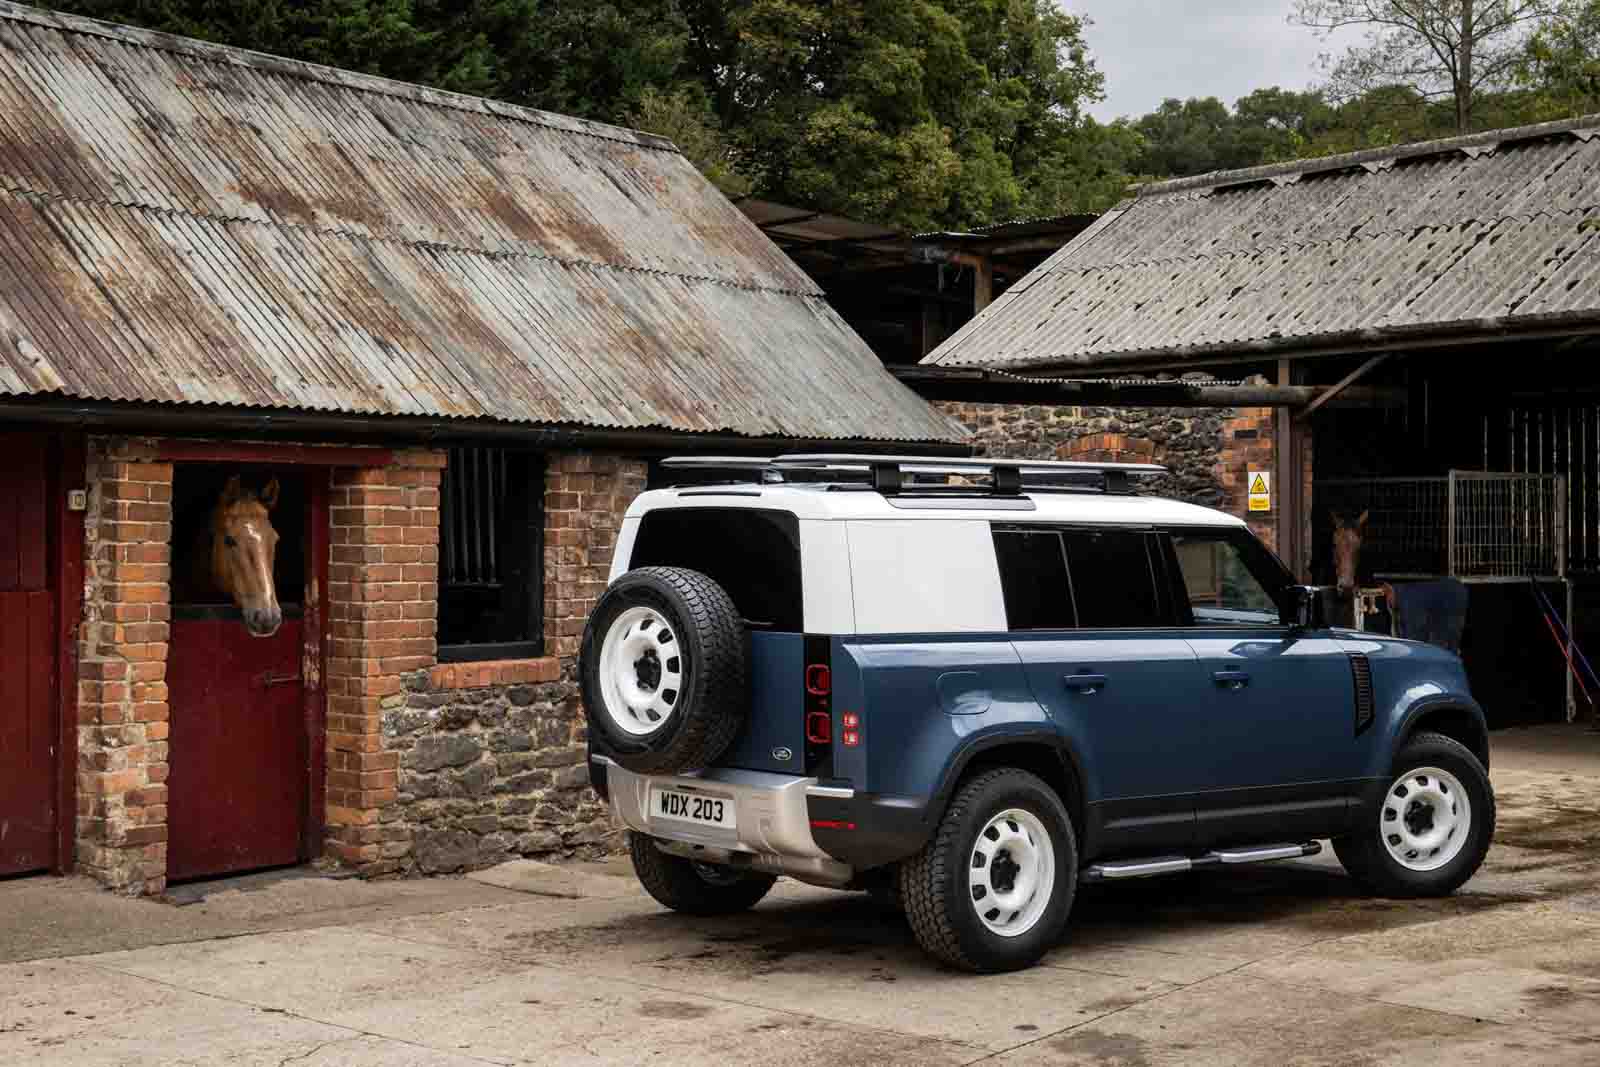 2021 Land Rover Defender Hard Top Is A Lcv With 4x4 Capabilities